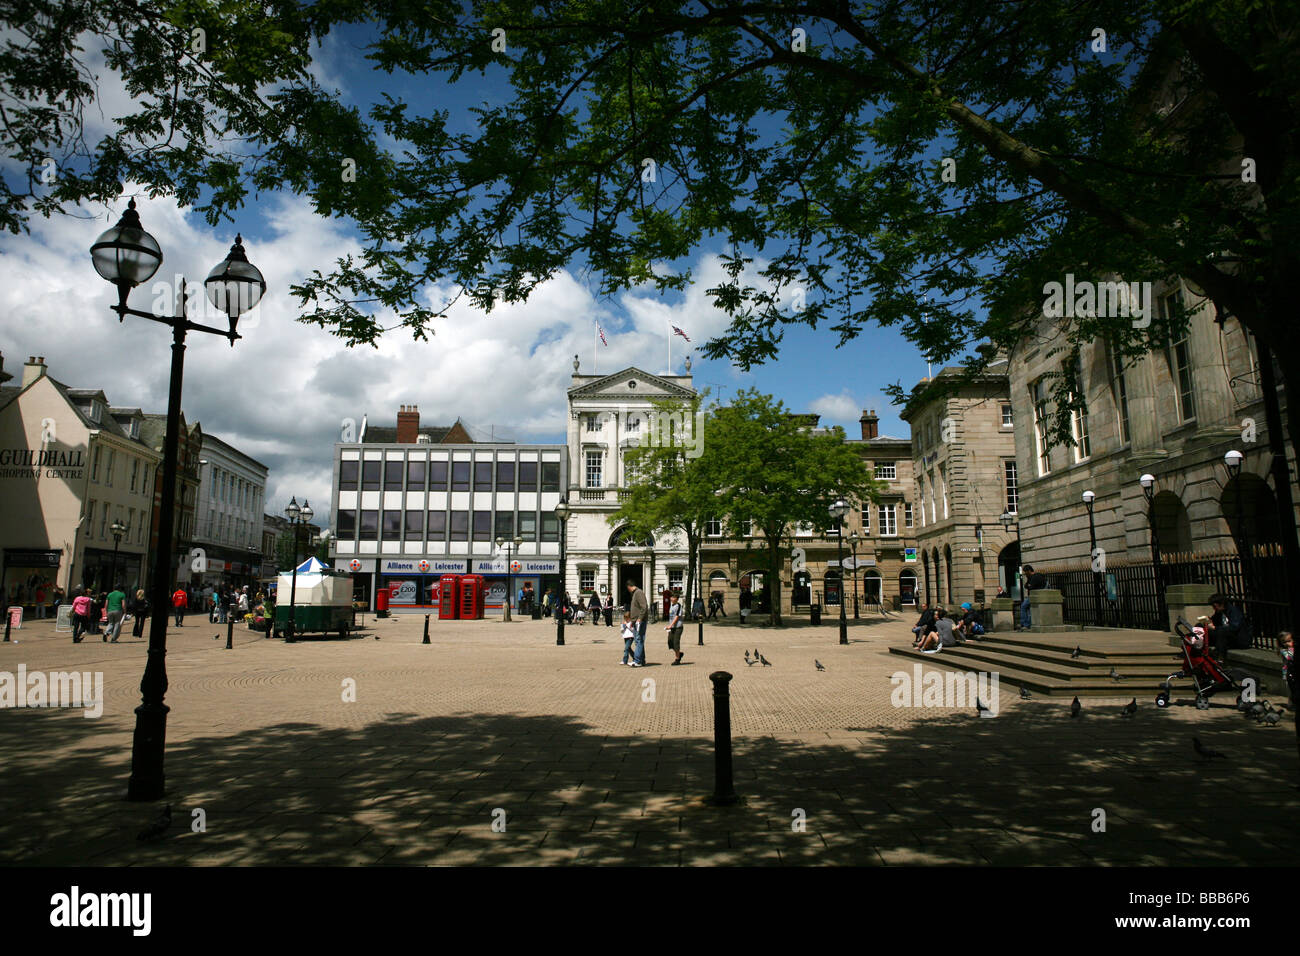 Stafford, England, town centre Stock Photo